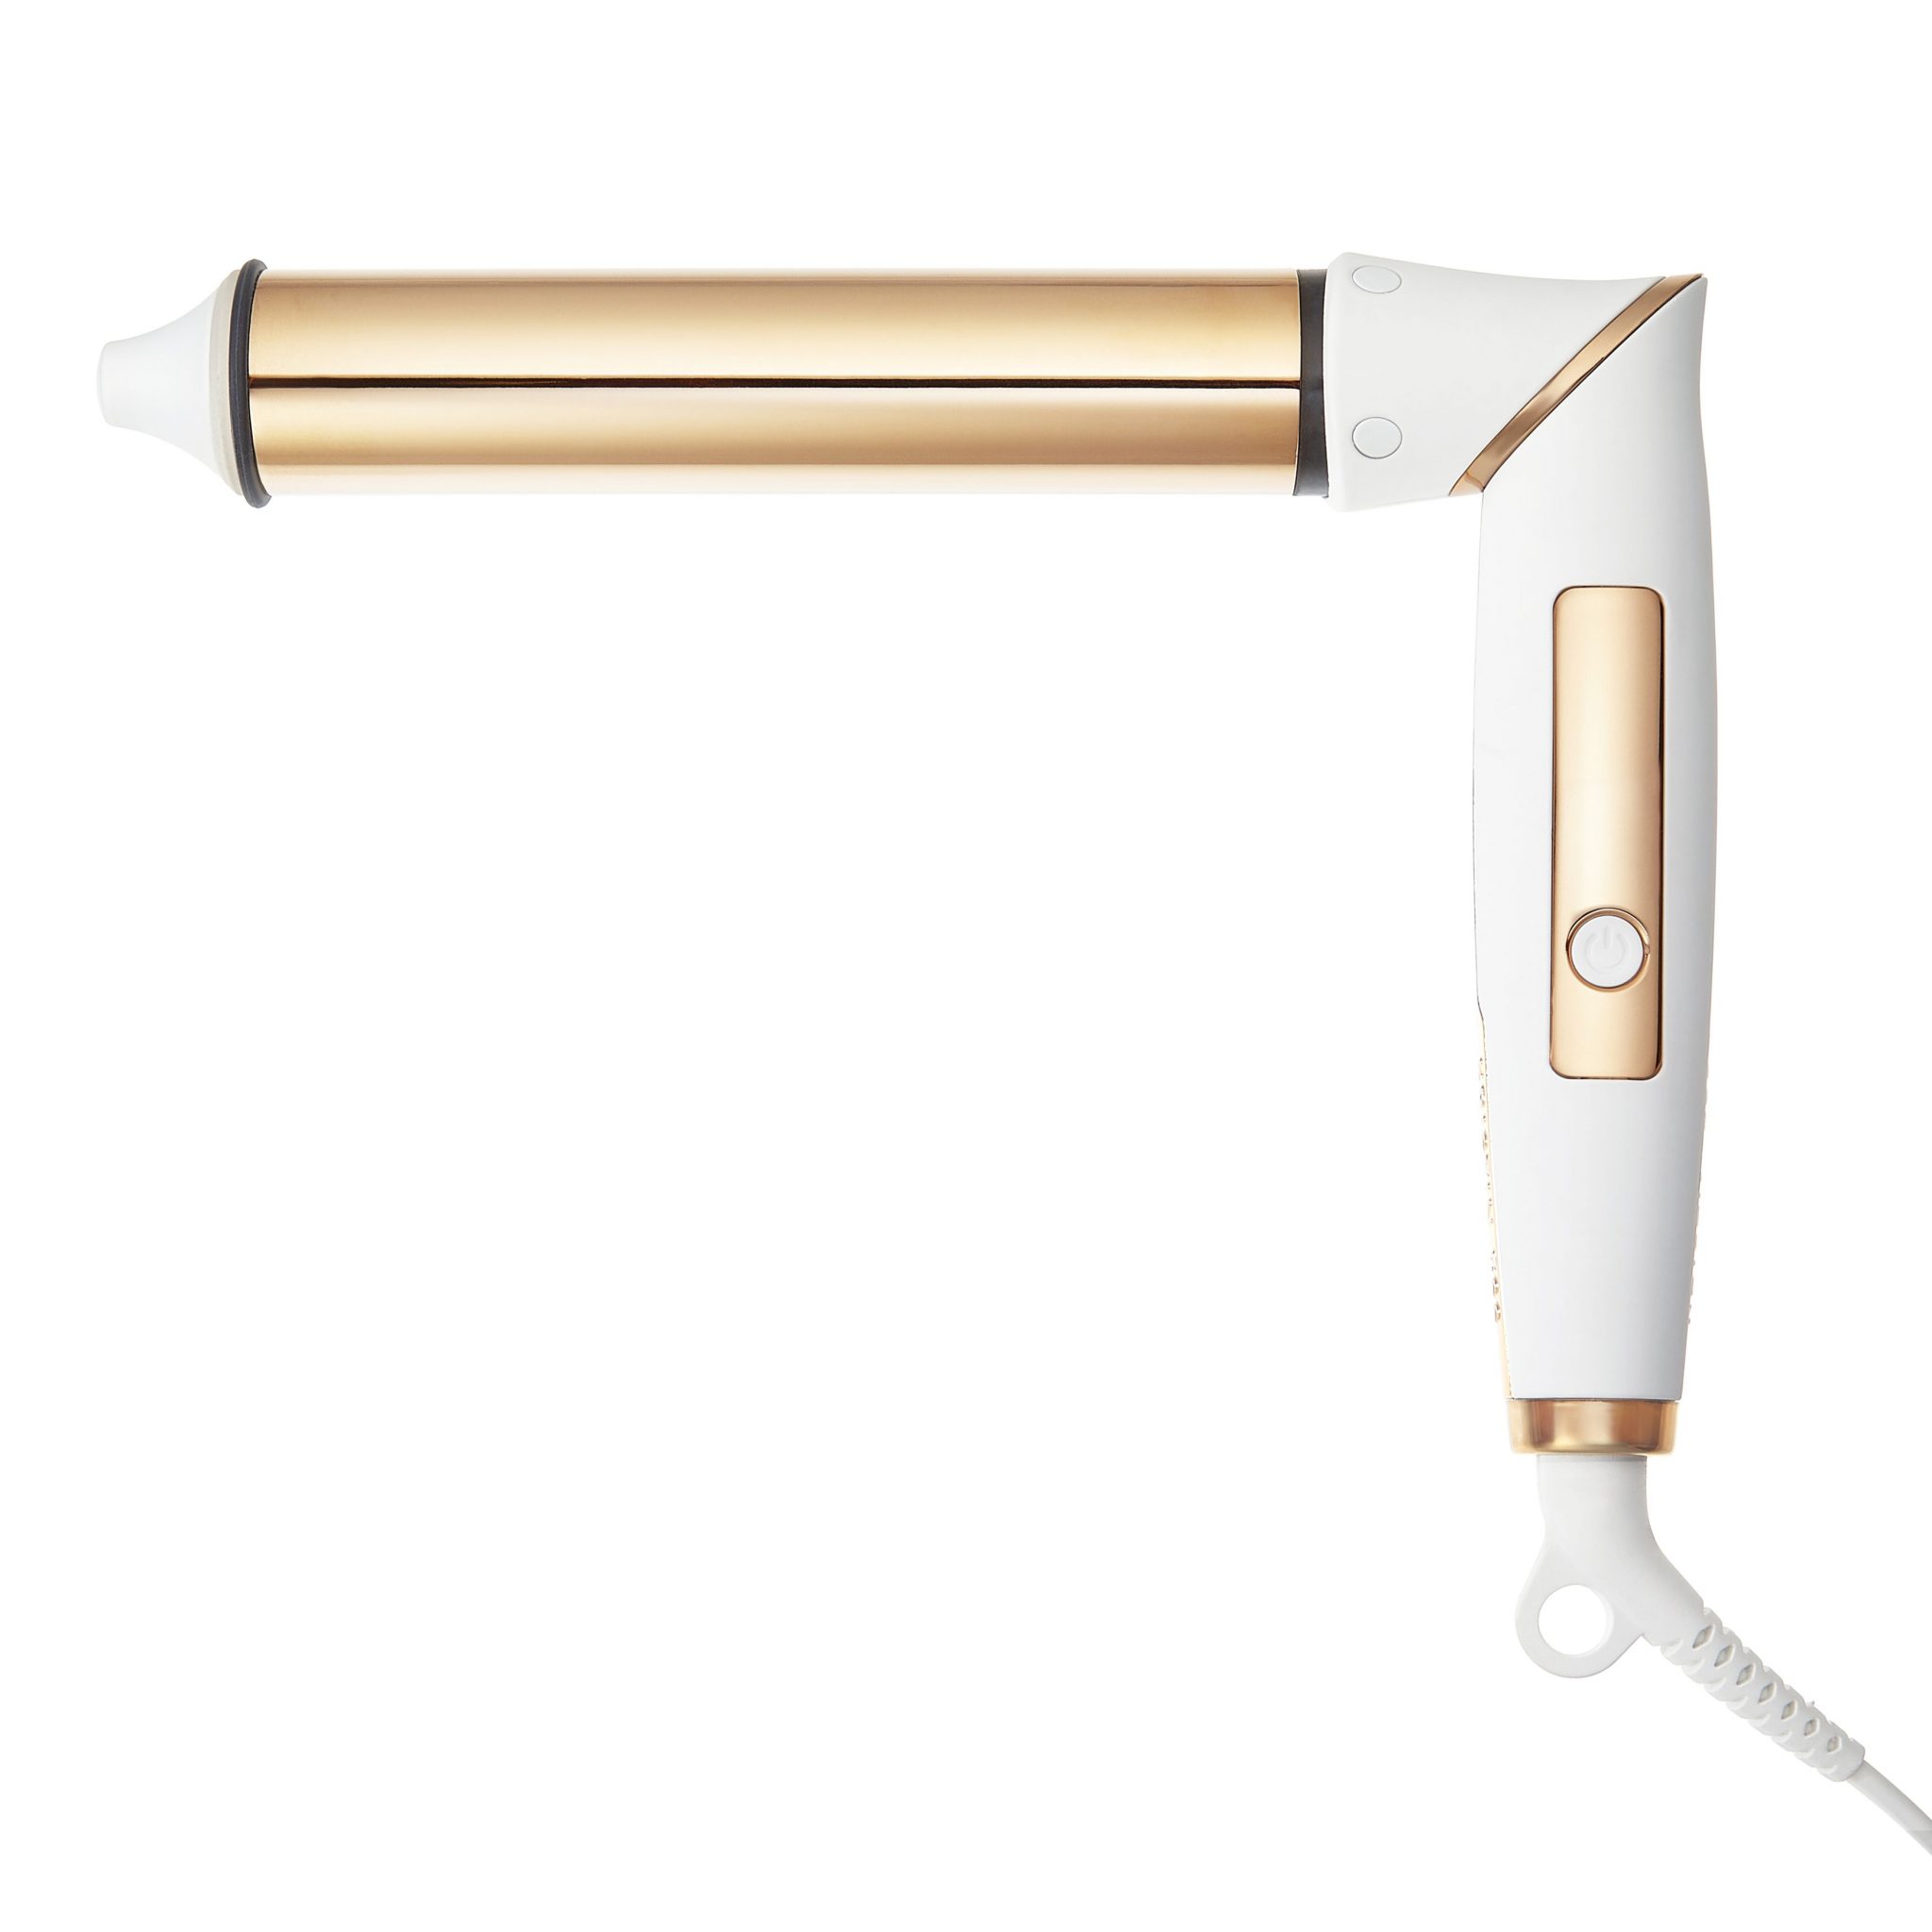 lucy hale’s hairstylist just launched hot tools at target for under $100